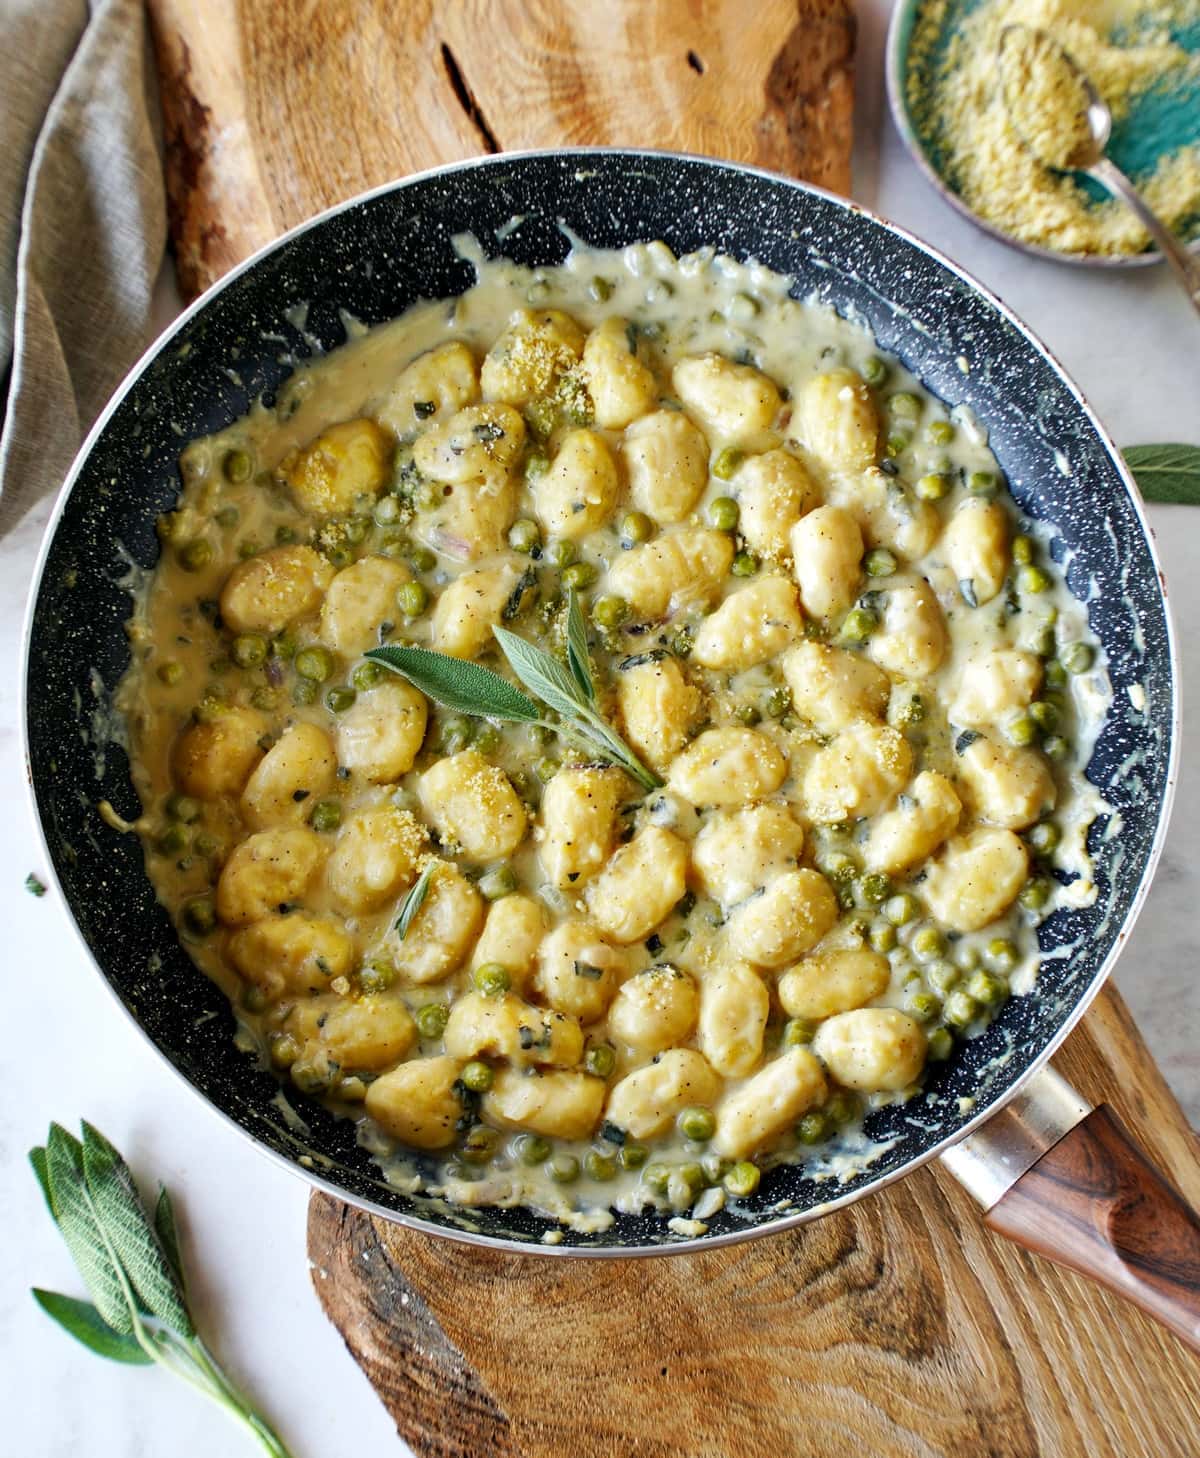 sage gnocchi with peas and cream sauce in skillet